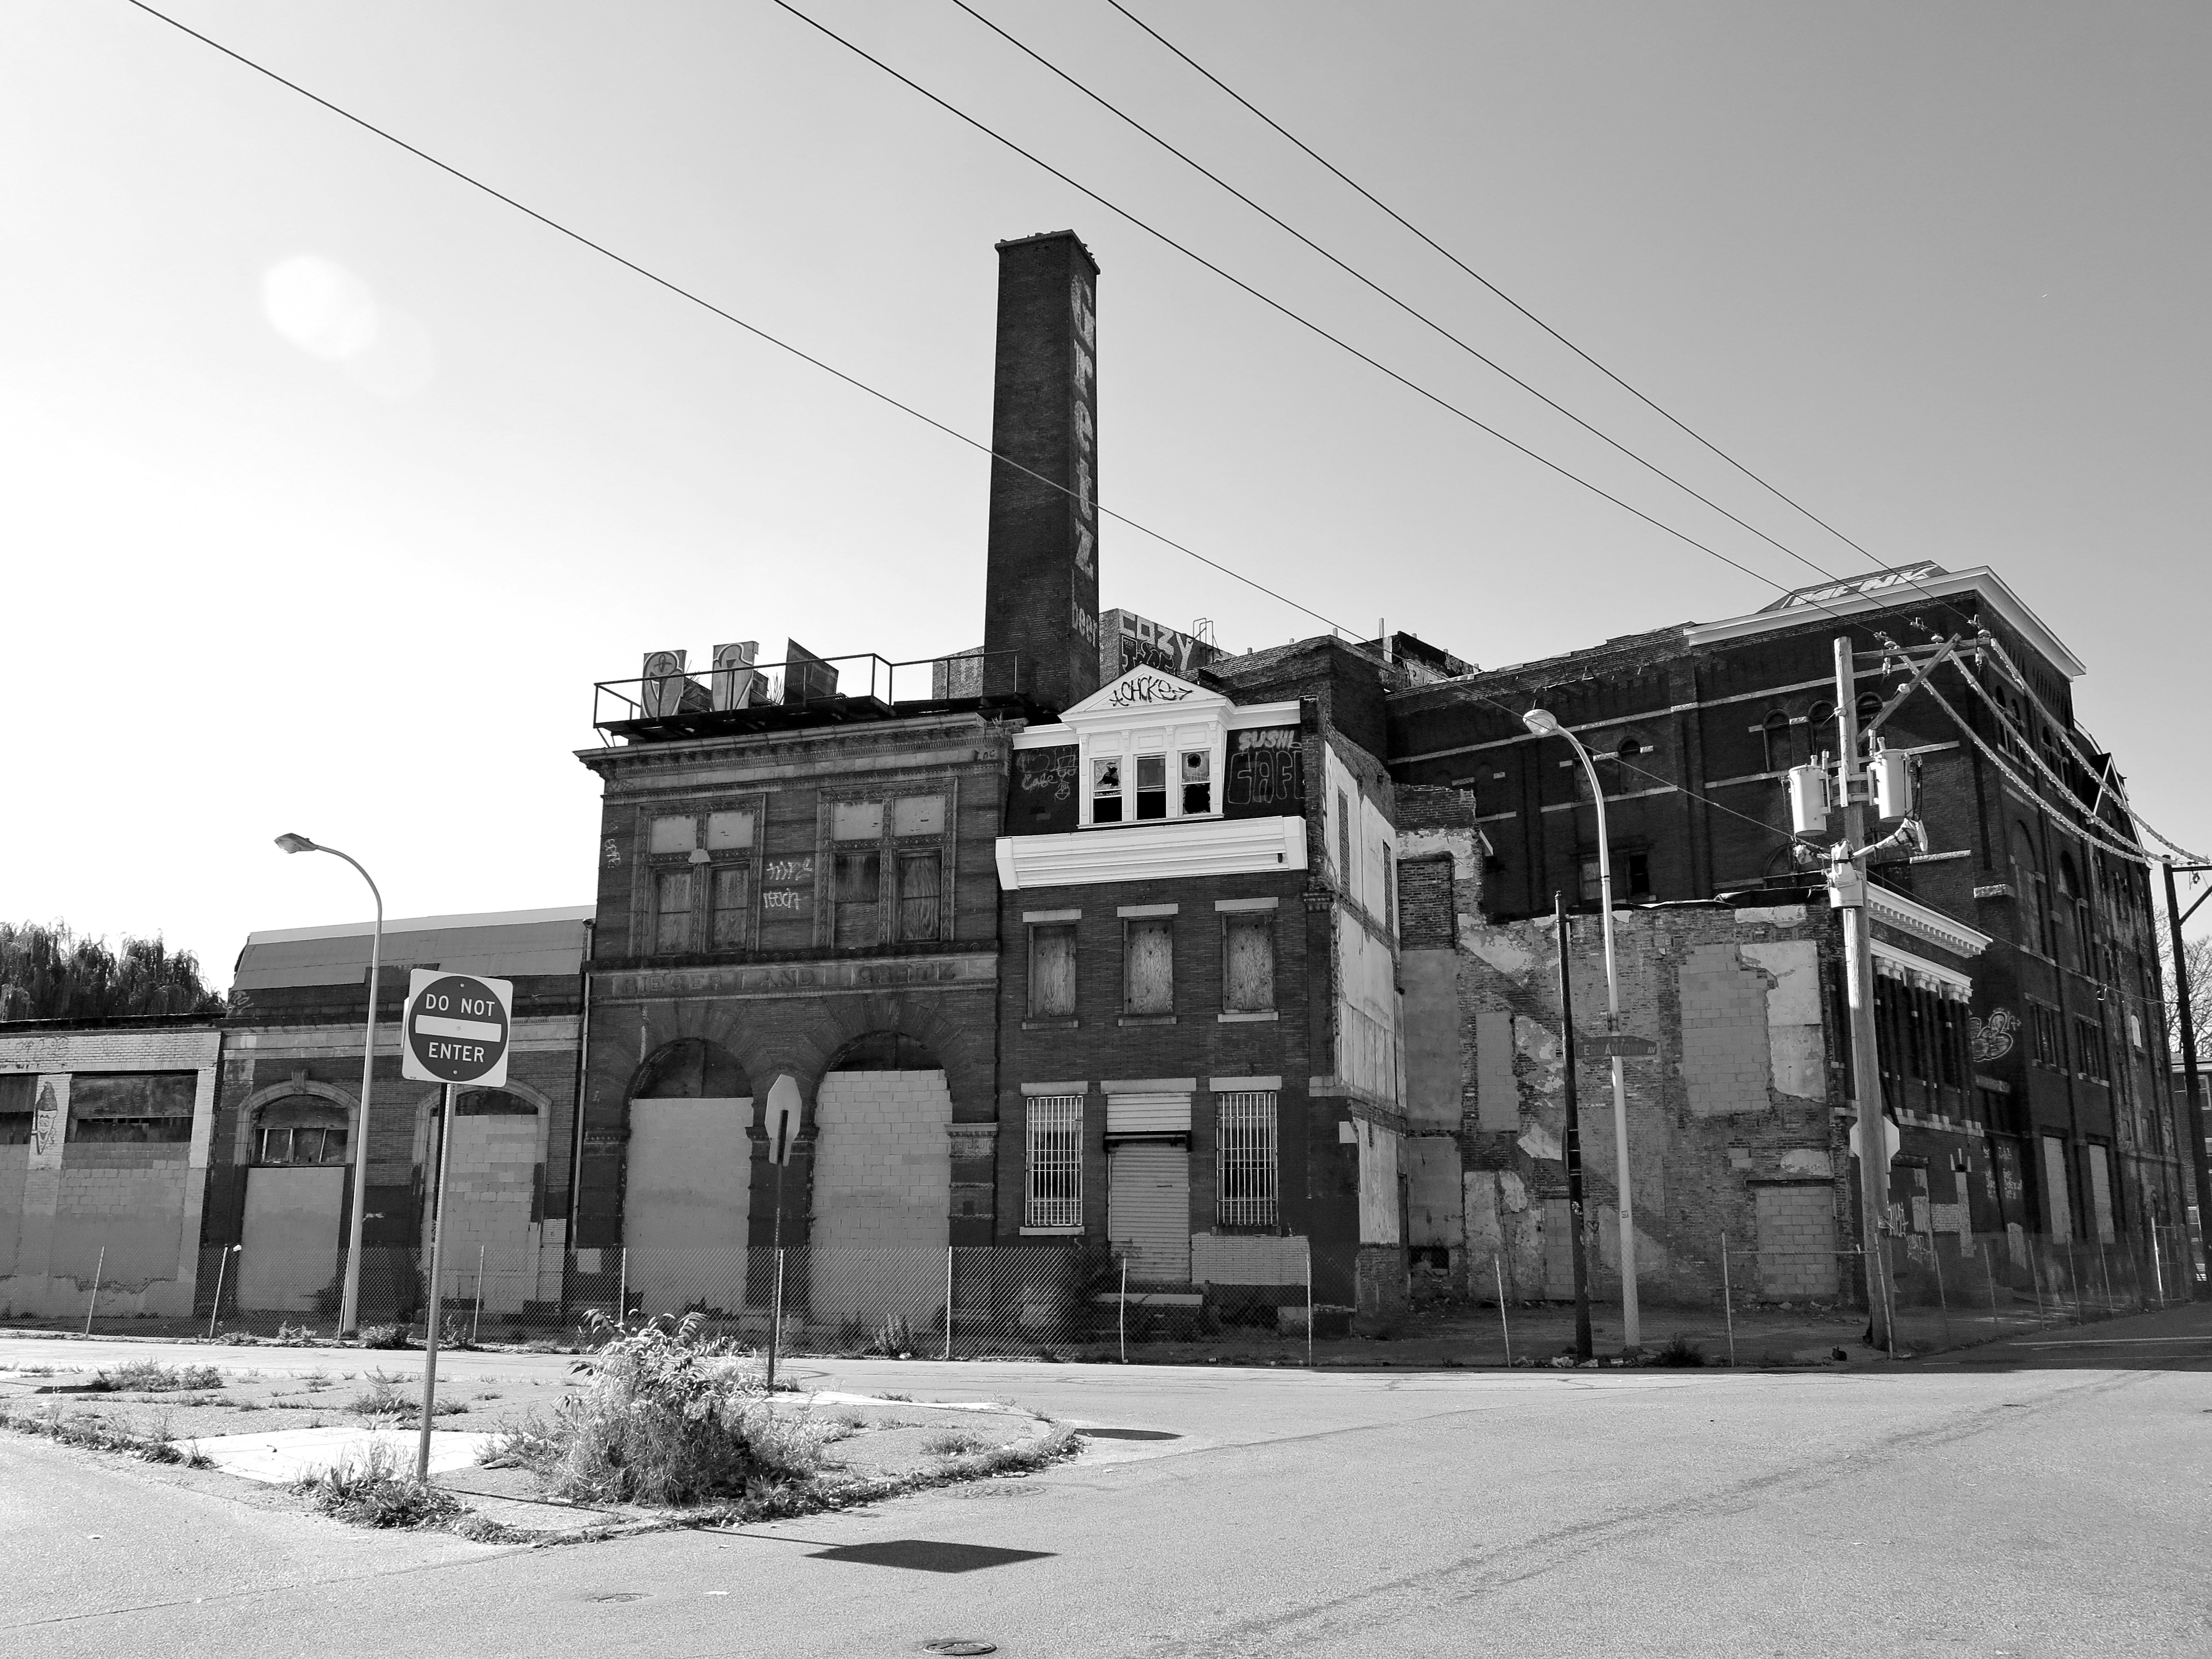 Gretz Brewery complex at Germantown and Oxford | 2013